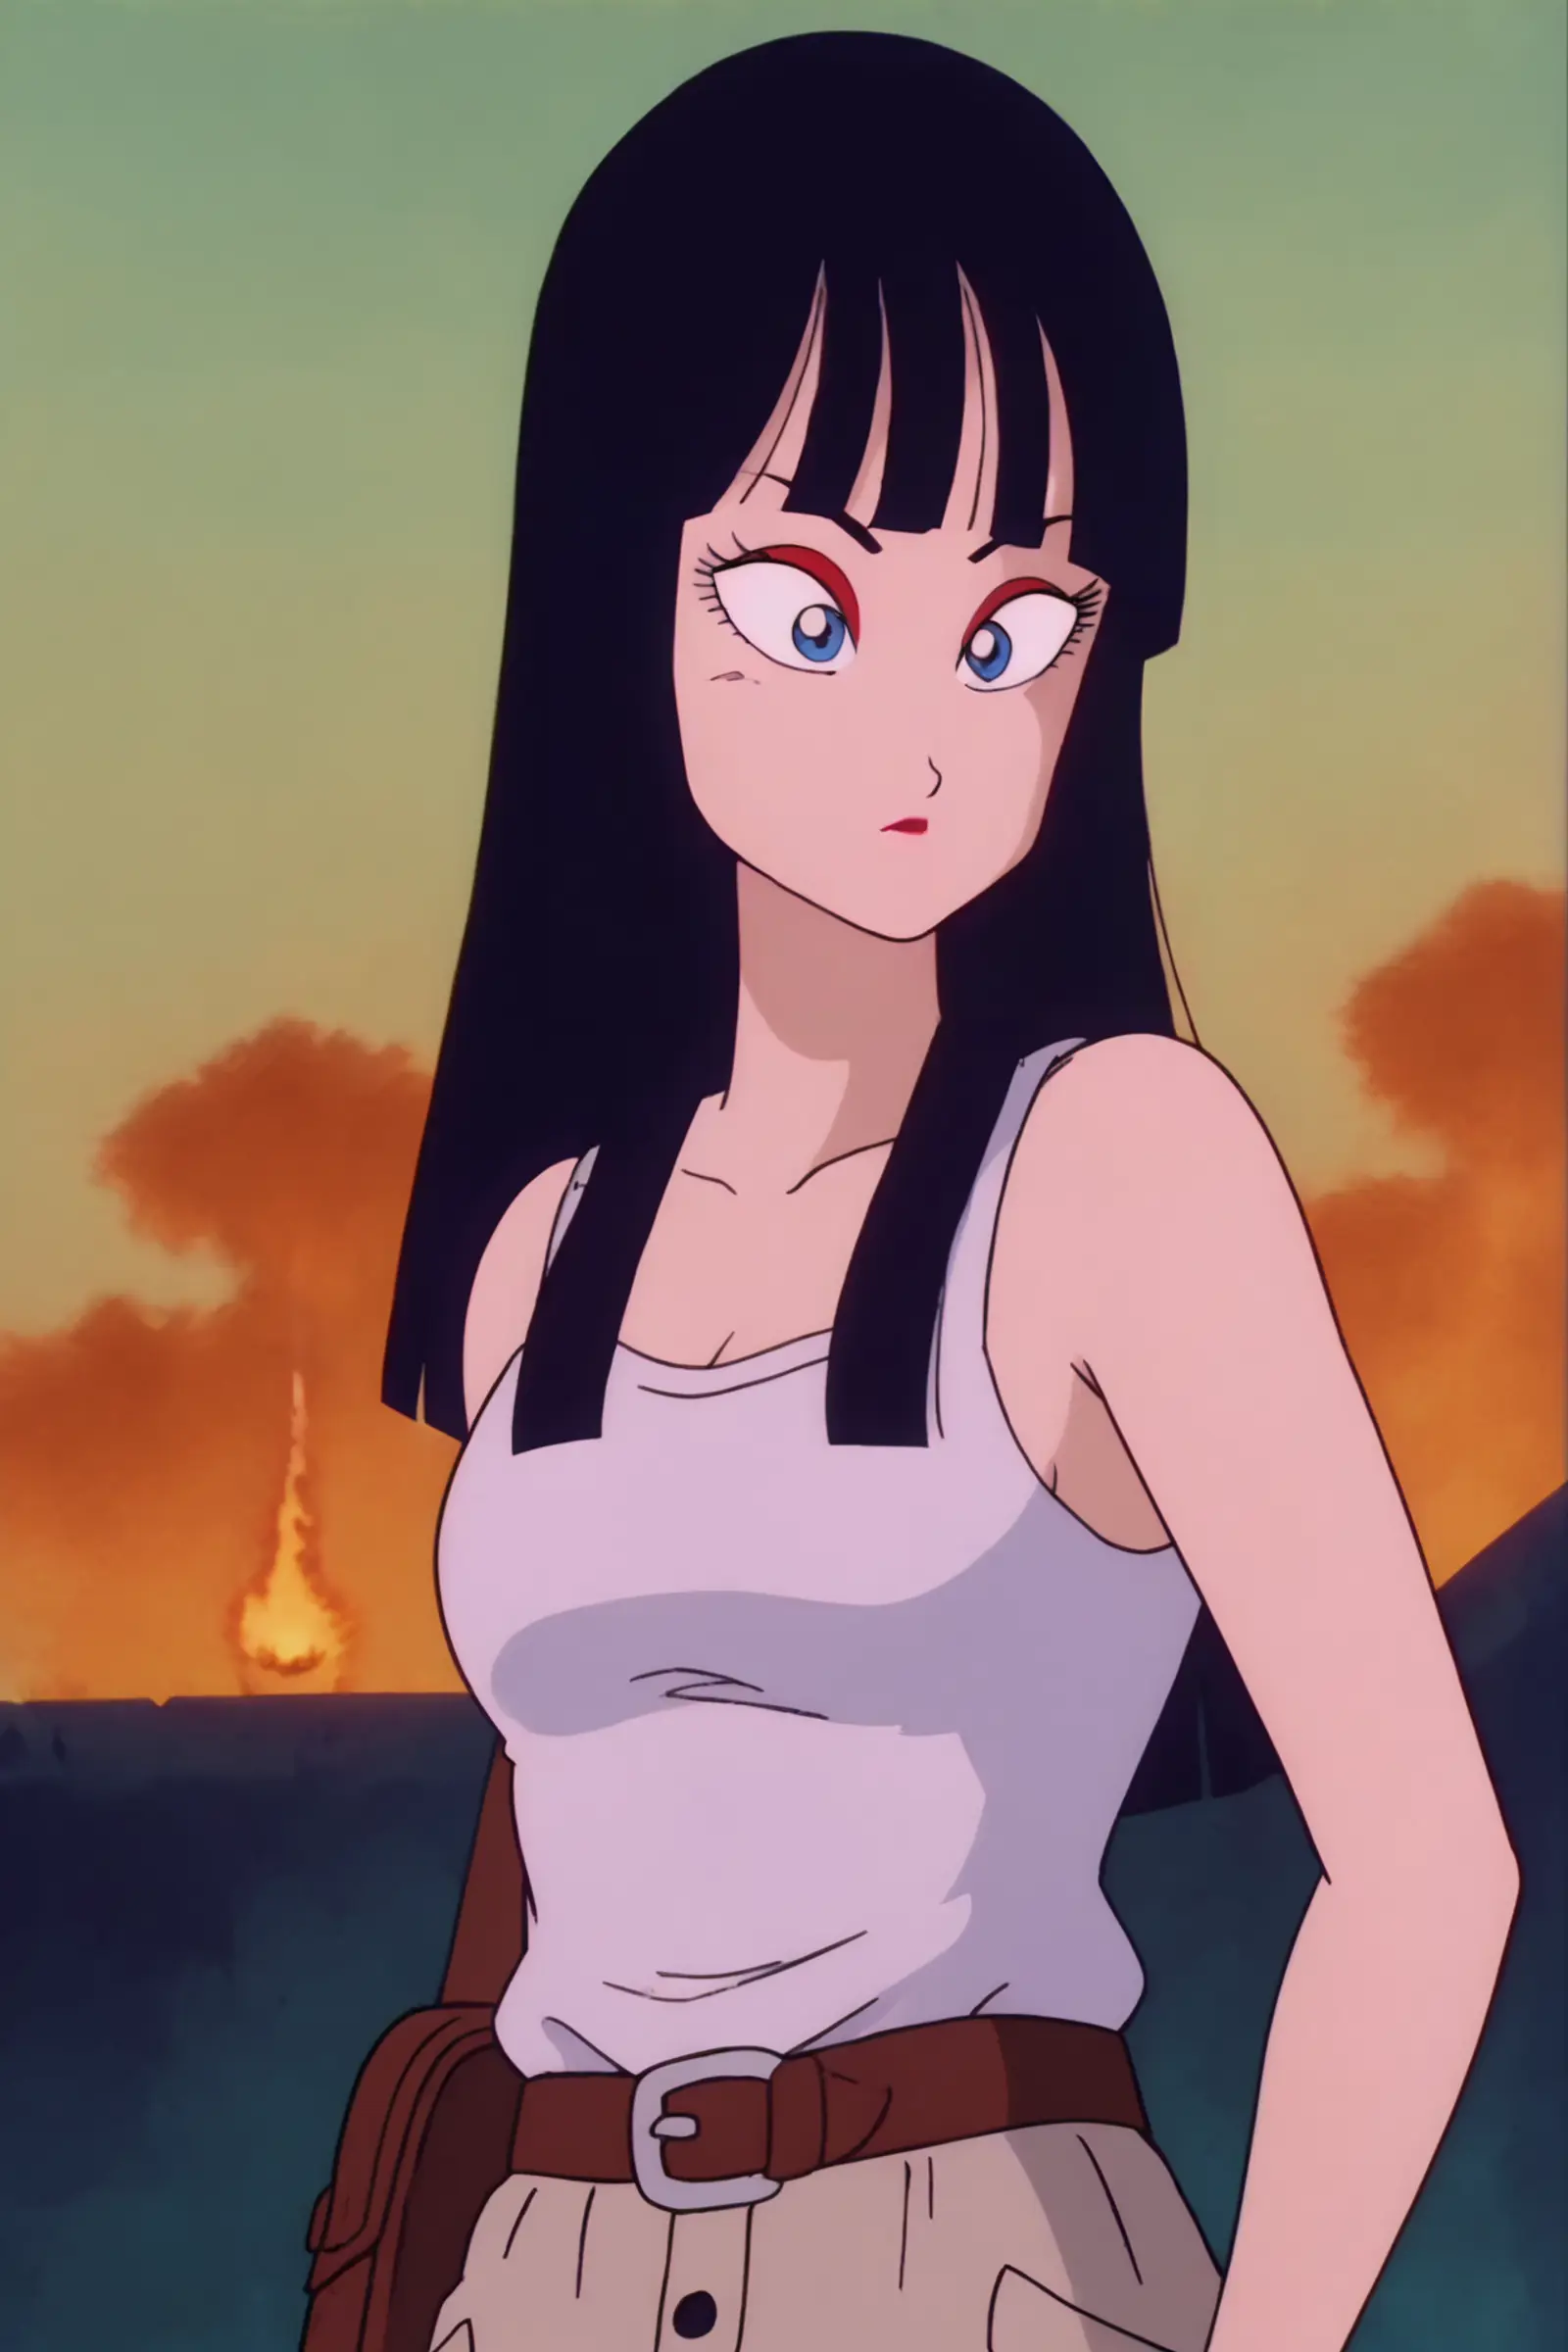 A young woman with black hair and blue eyes wearing a white tank top and brown belt with a beige pants. In the background, there is a fiery evening sky behind a blue mountain. 